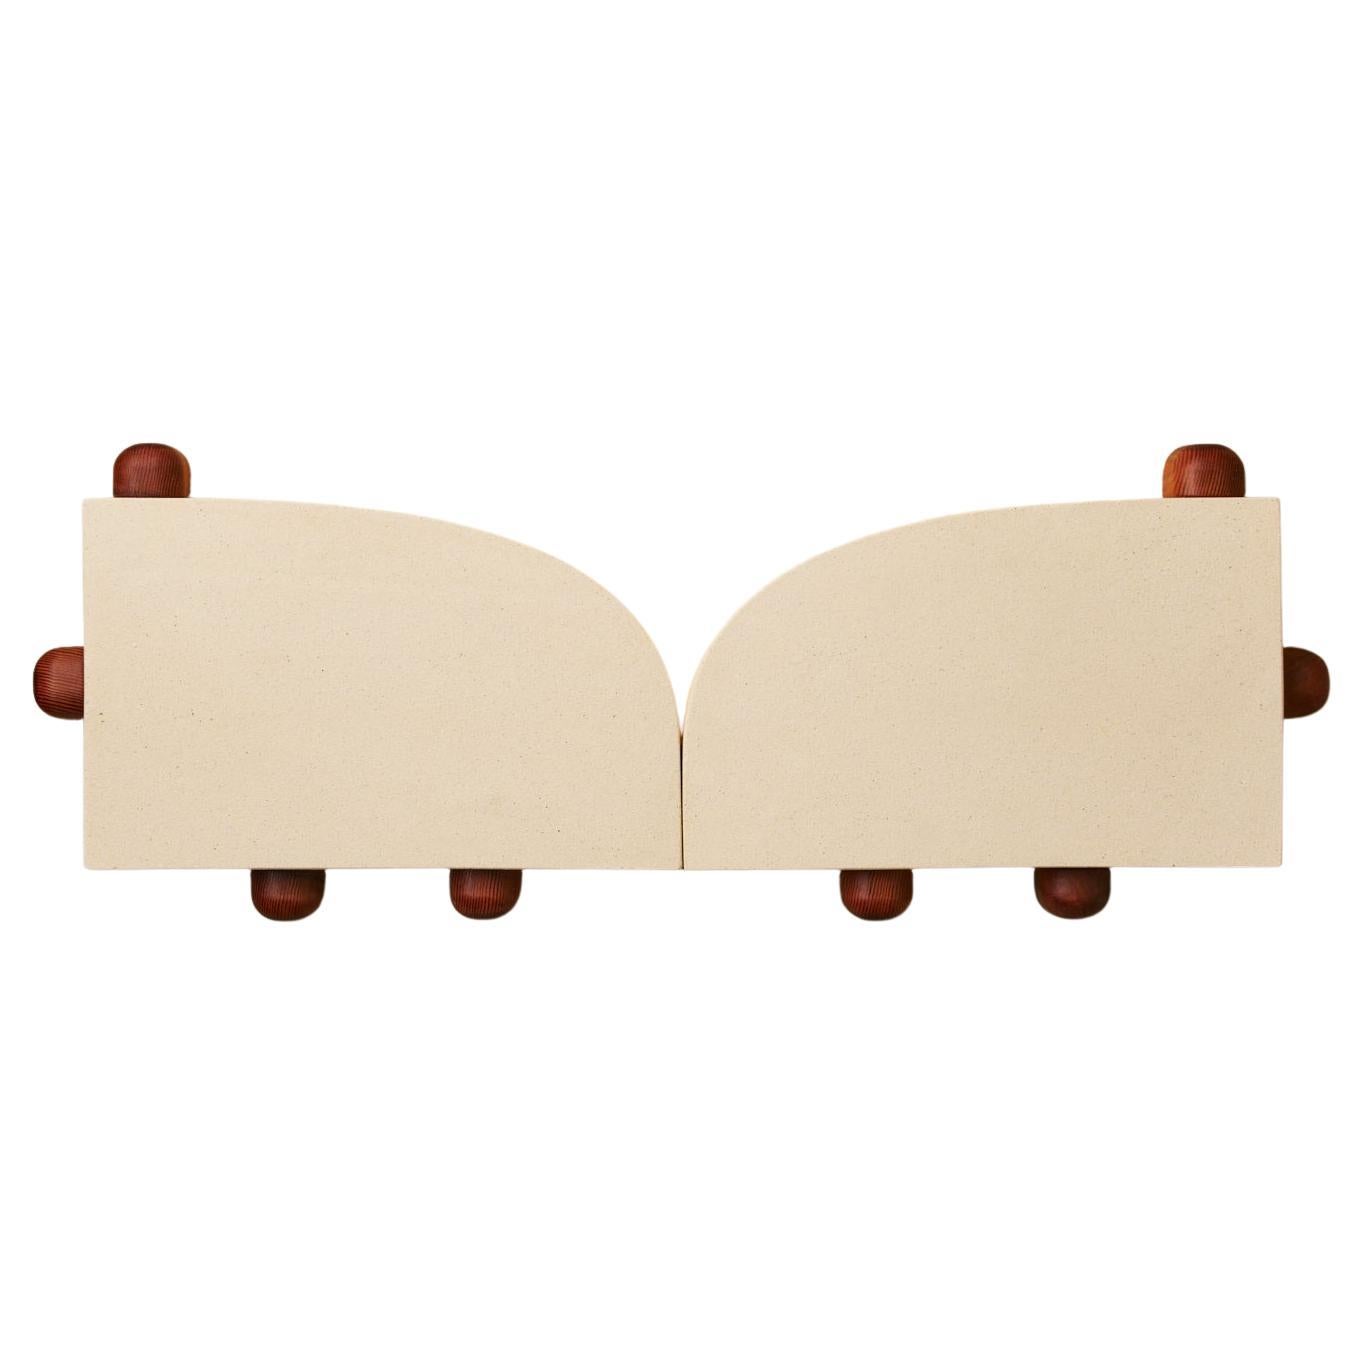 Sierra Sconces in Ceramic, Wood and Brass by Piscina - H2 For Sale